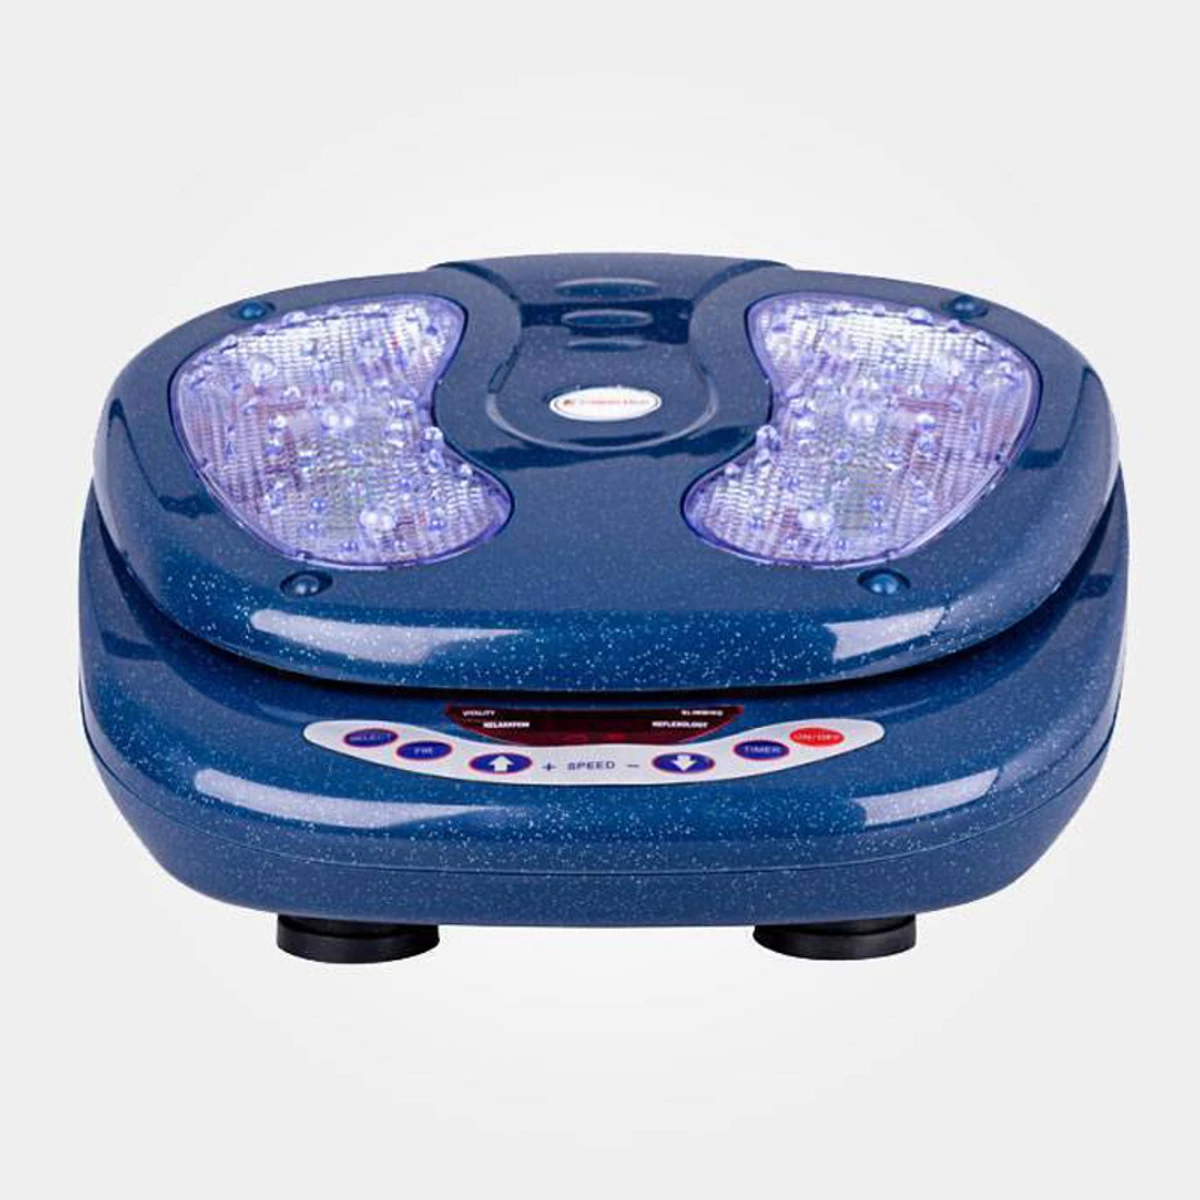 Vibration Foot Massager With Remote Control